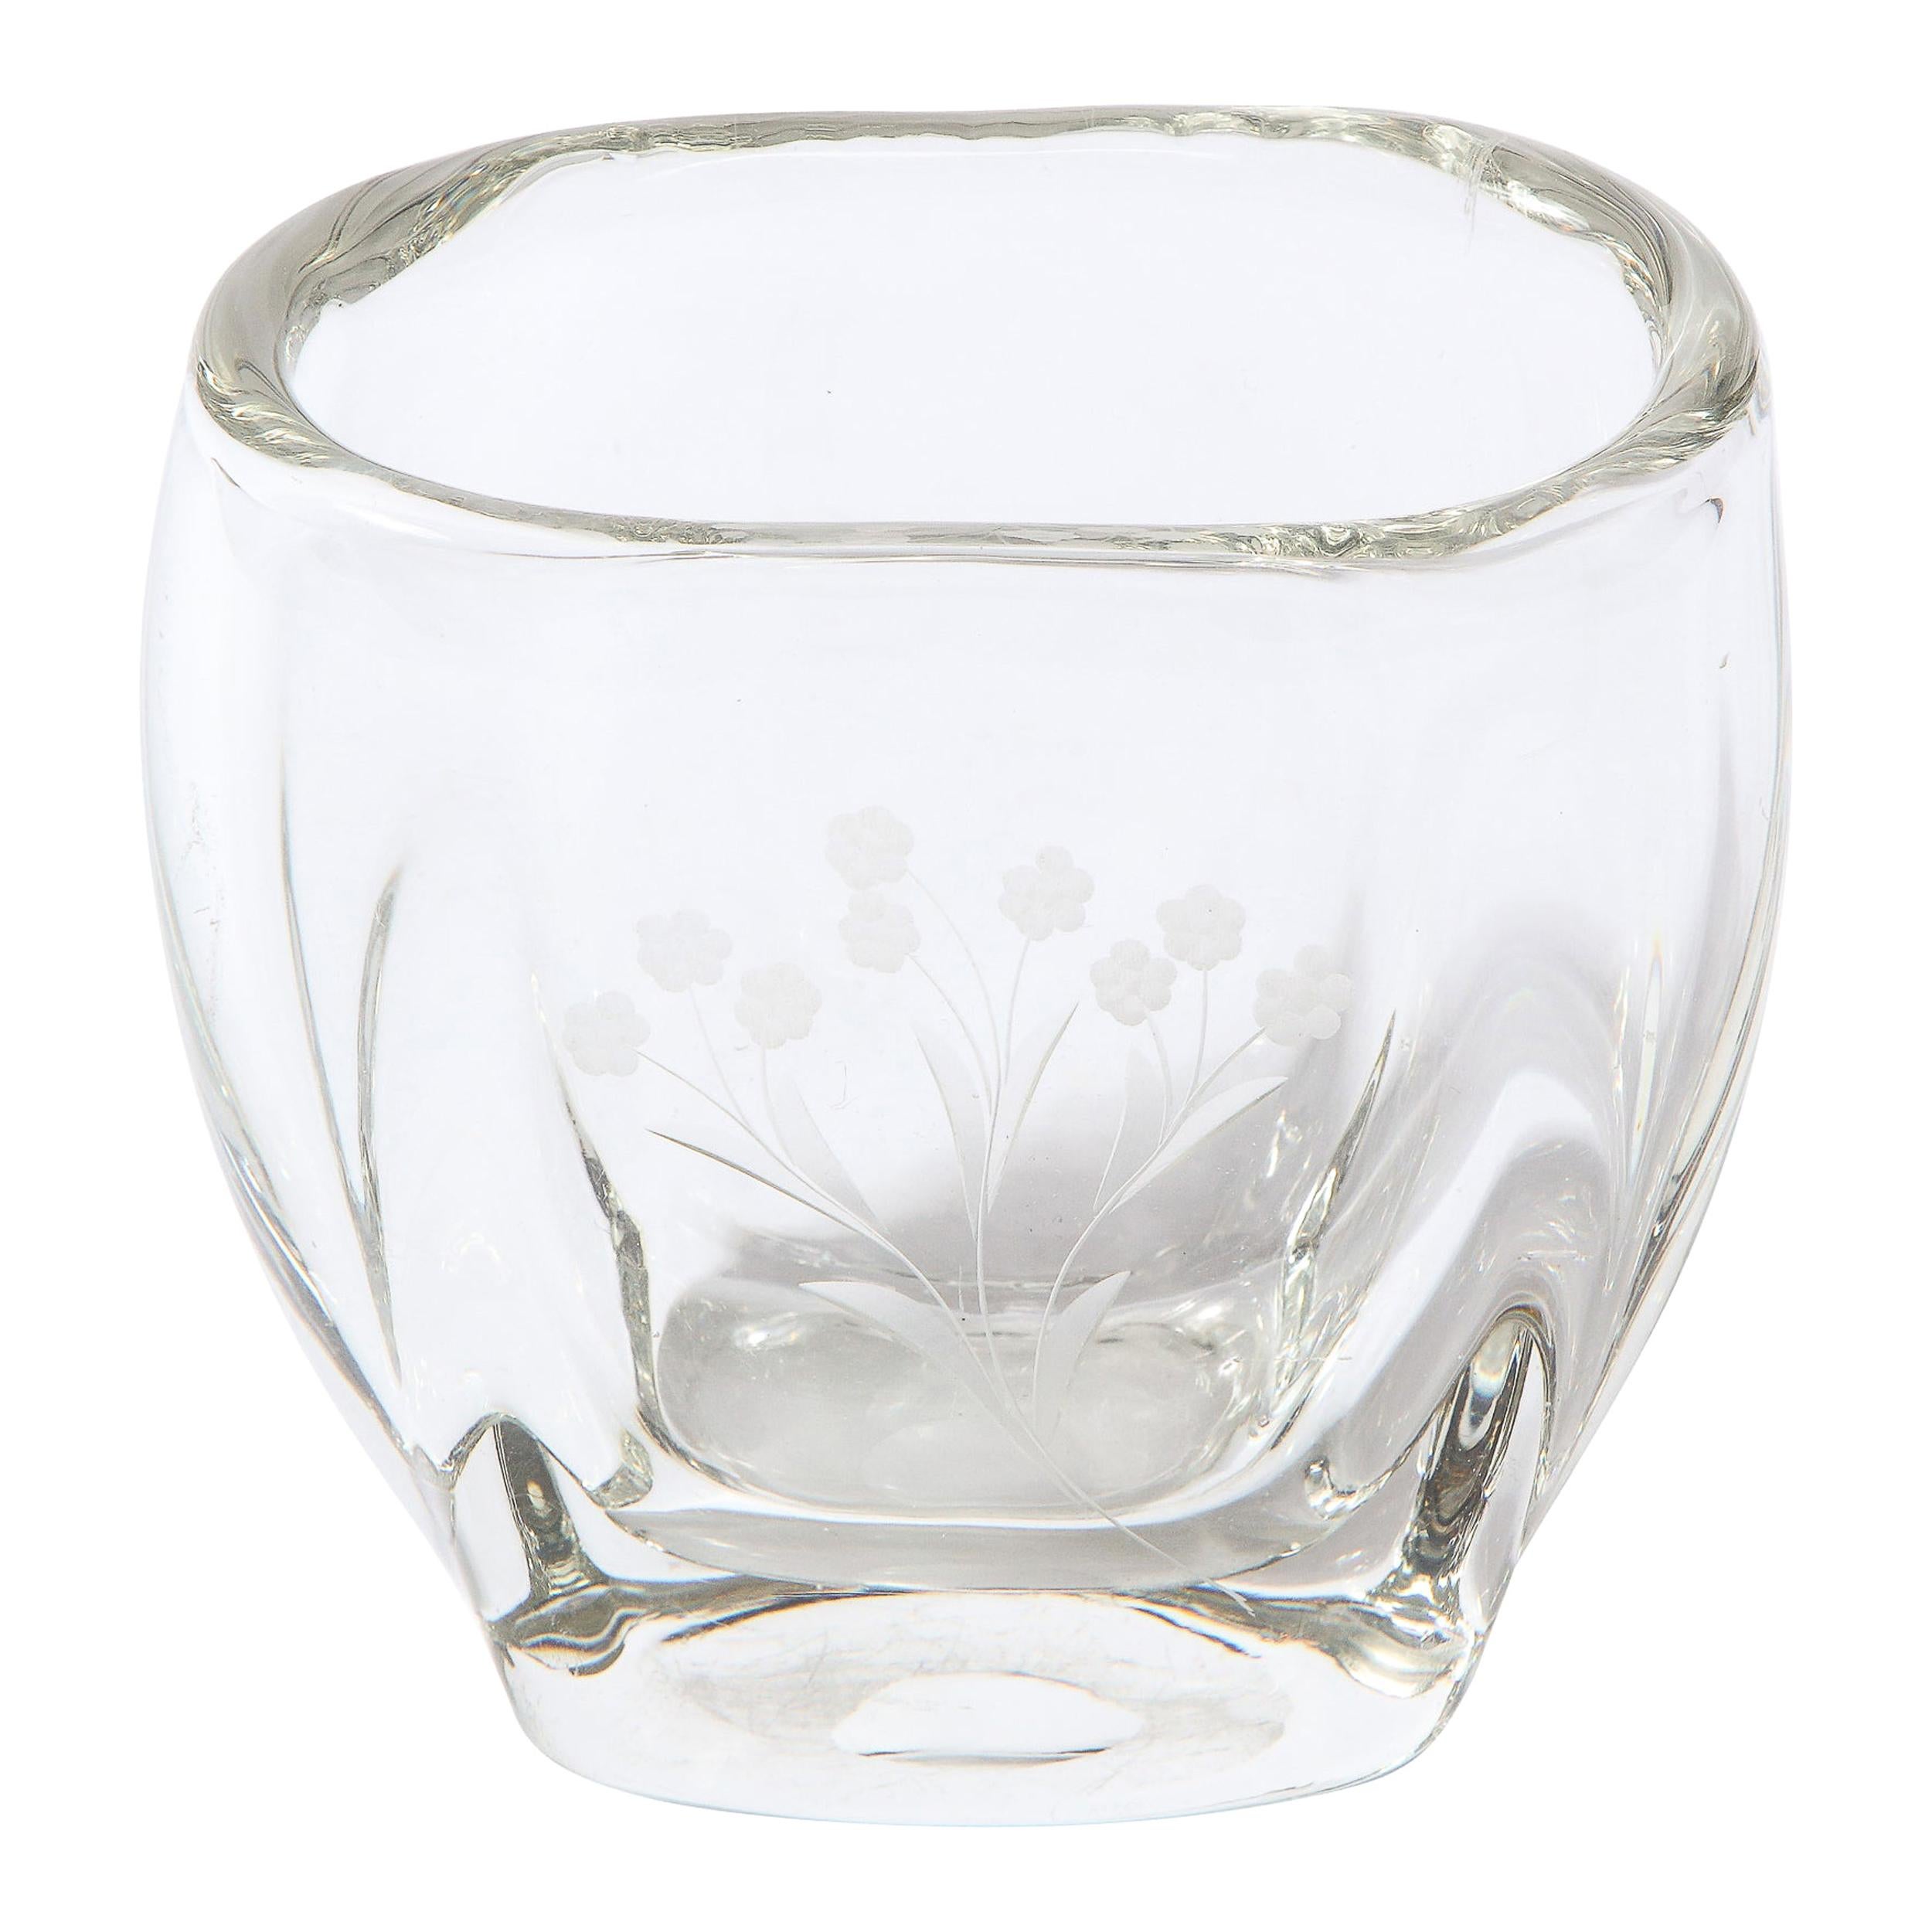 Swedish Mid-Century Modern Etched & Frosted Translucent Vase with Floral Motif